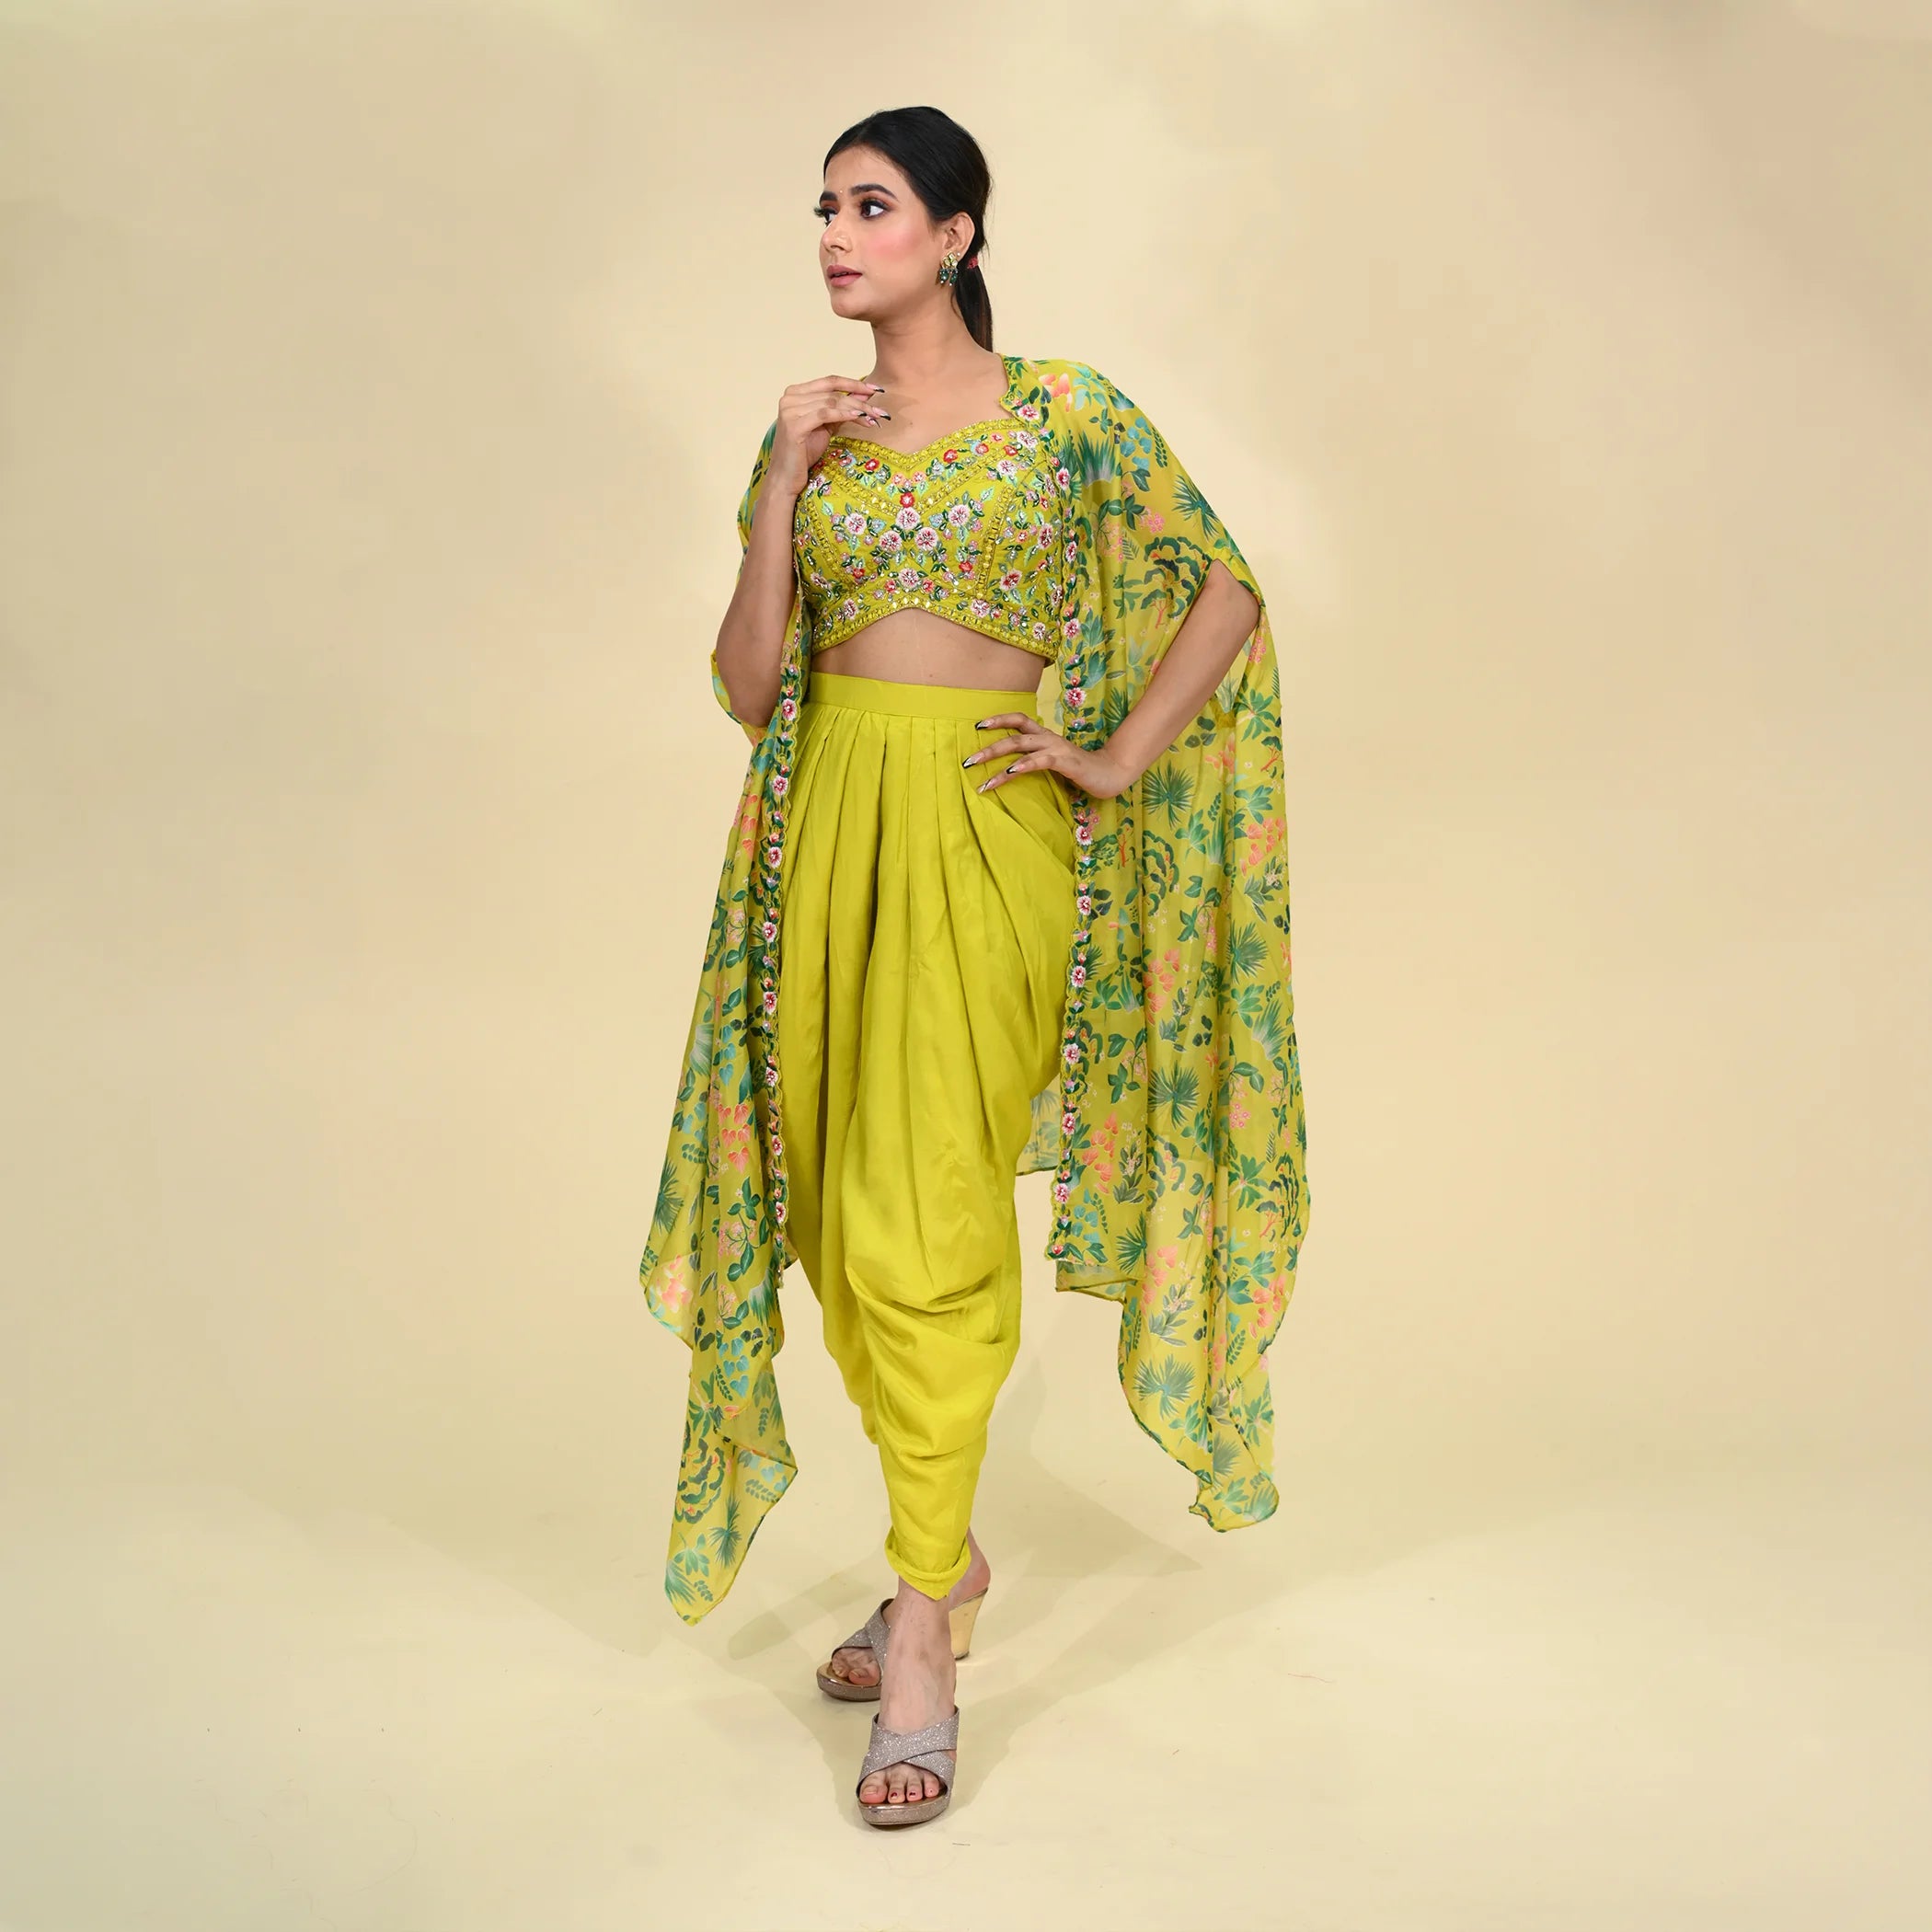 Crop Top With Dhoti Pants Indo Western Dress Blouse With Dhoti, Indian  Dress | eBay